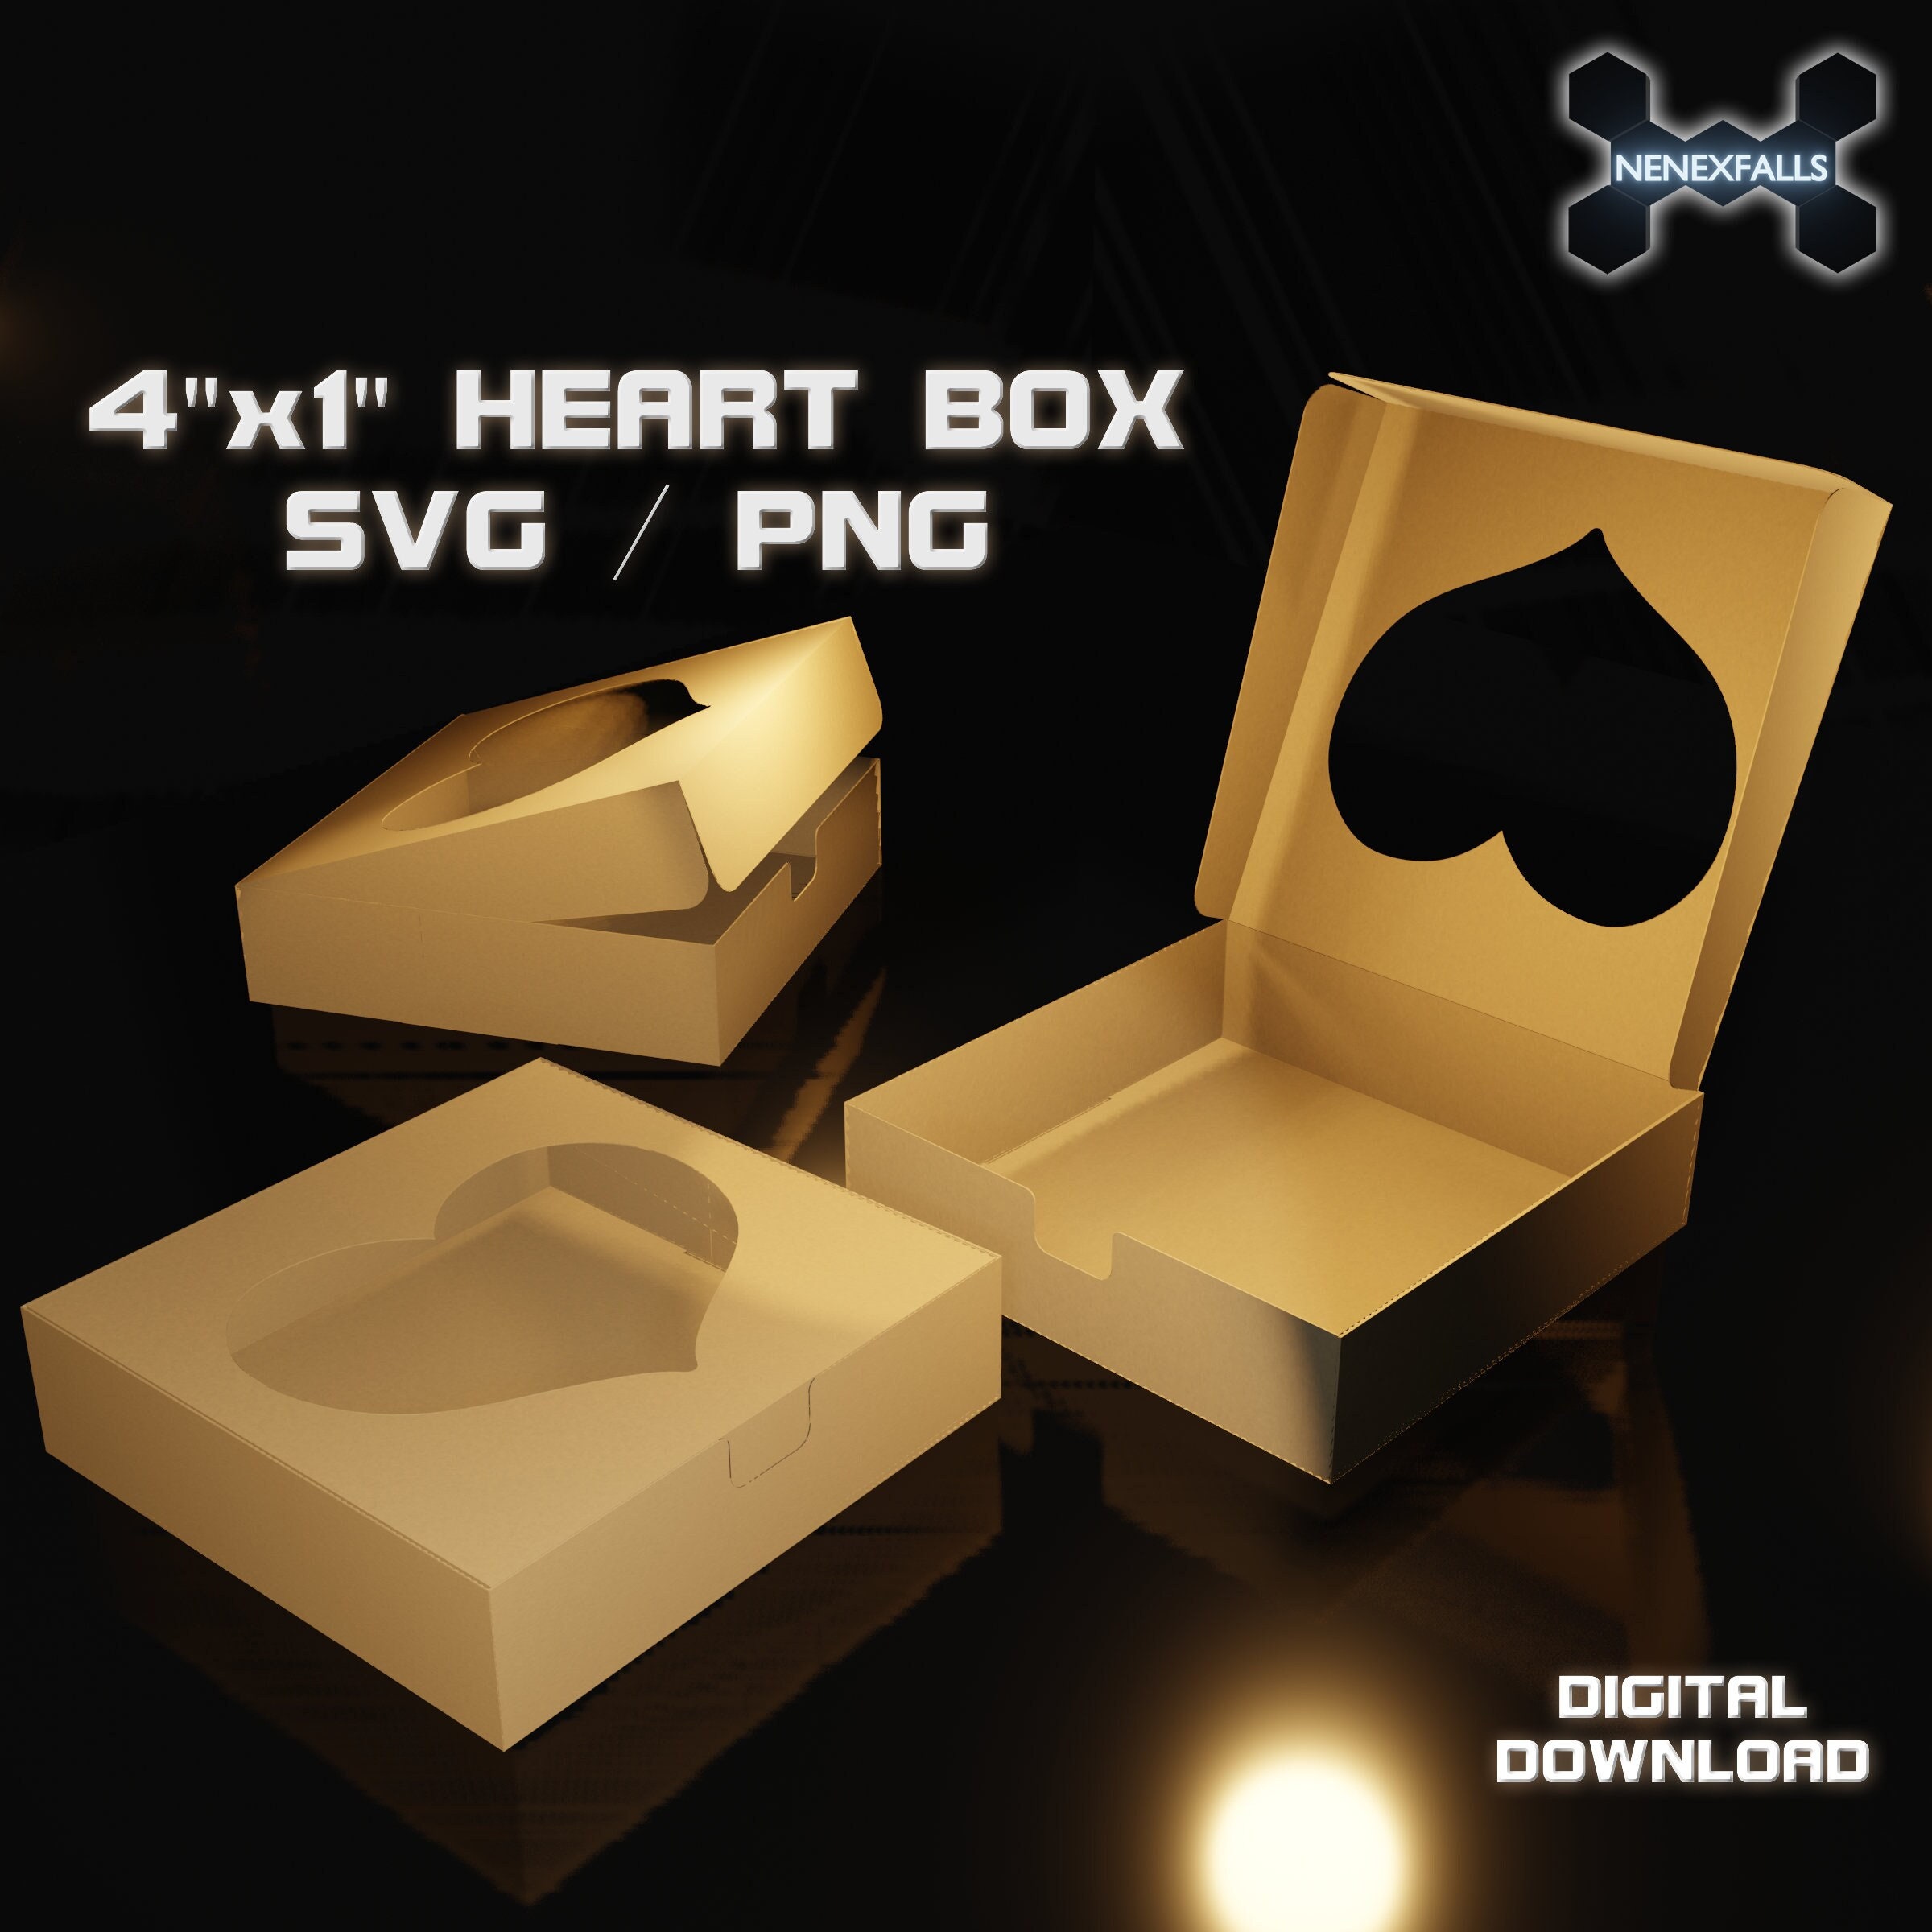 10 small boxes, heart-shaped, in cardboard, with lid, 8.5x7.5cm x Height.  5cm, to decorate